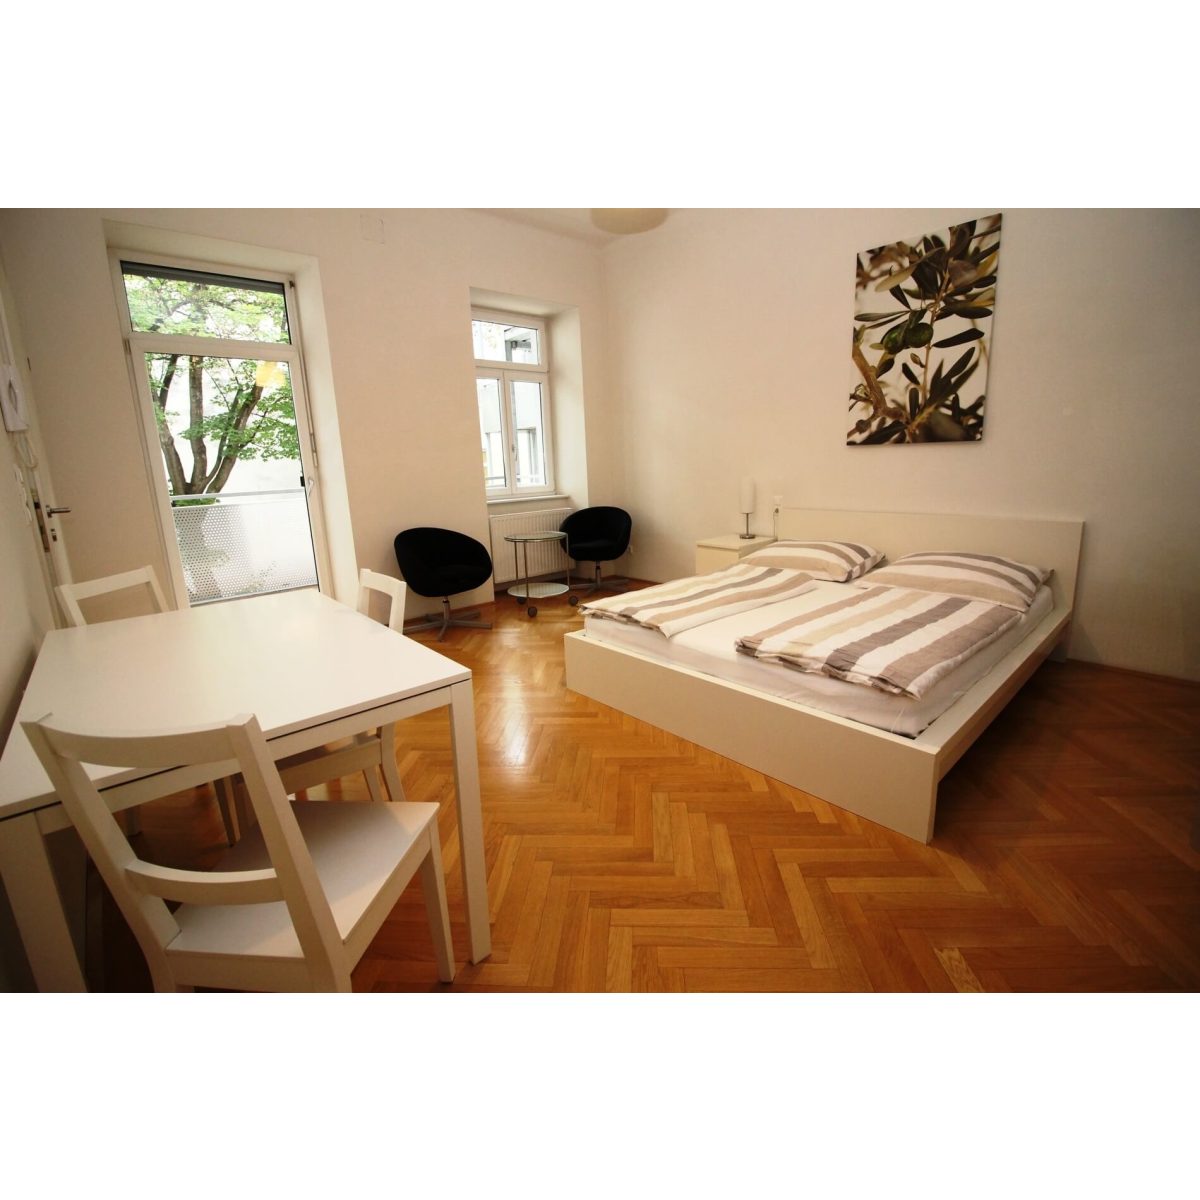 Completely furnished 2-bedroom apartment with Balcony in Vienna (great location) 13